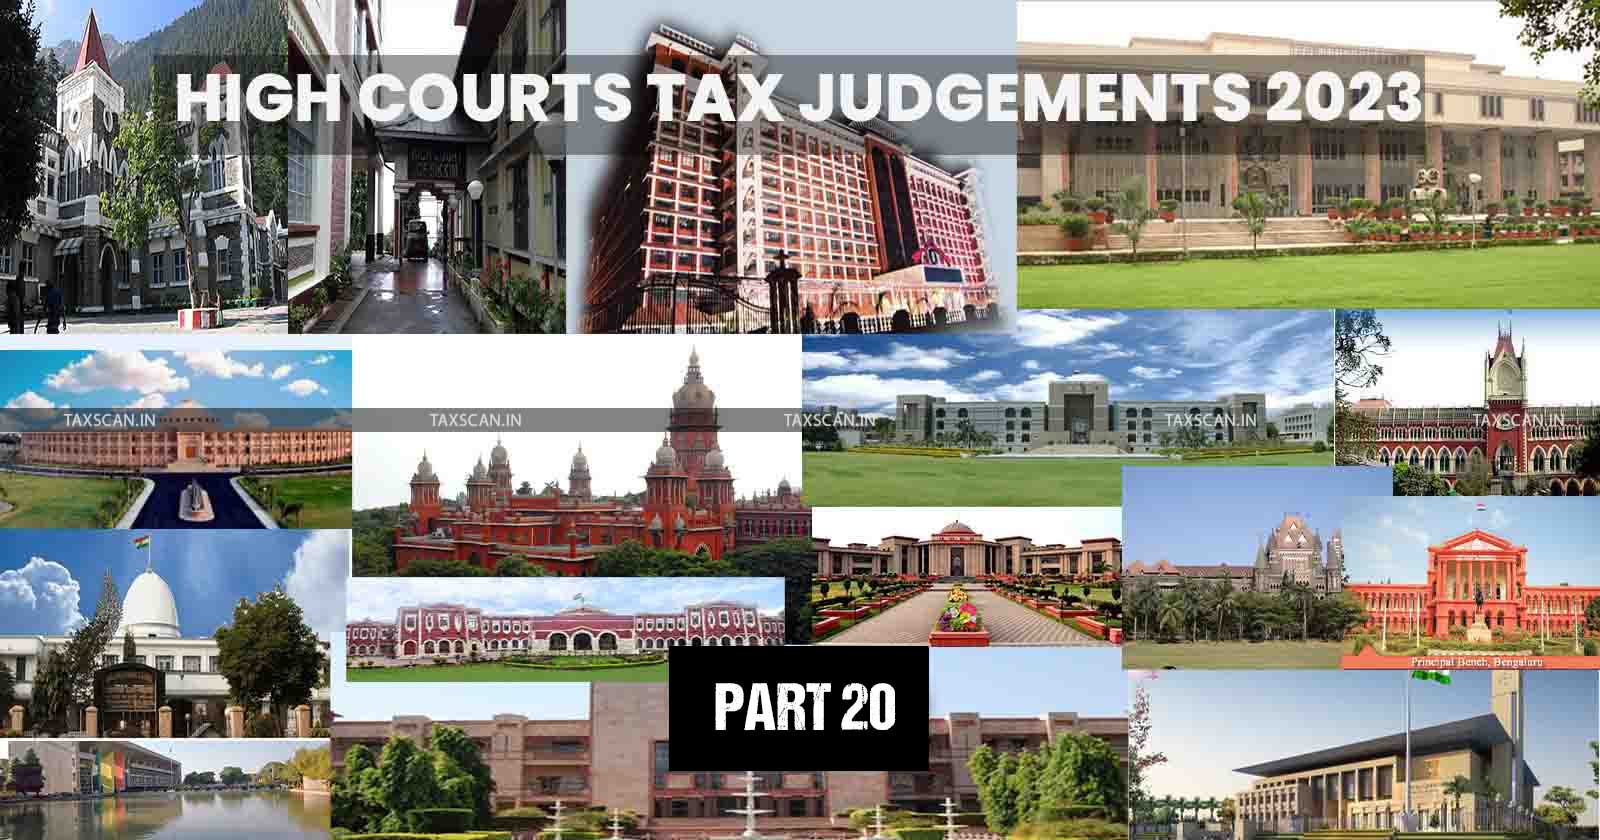 High Courts Annual Digest 2023 - Annual Digest - hc - high courts - taxscan annual digest - taxscan